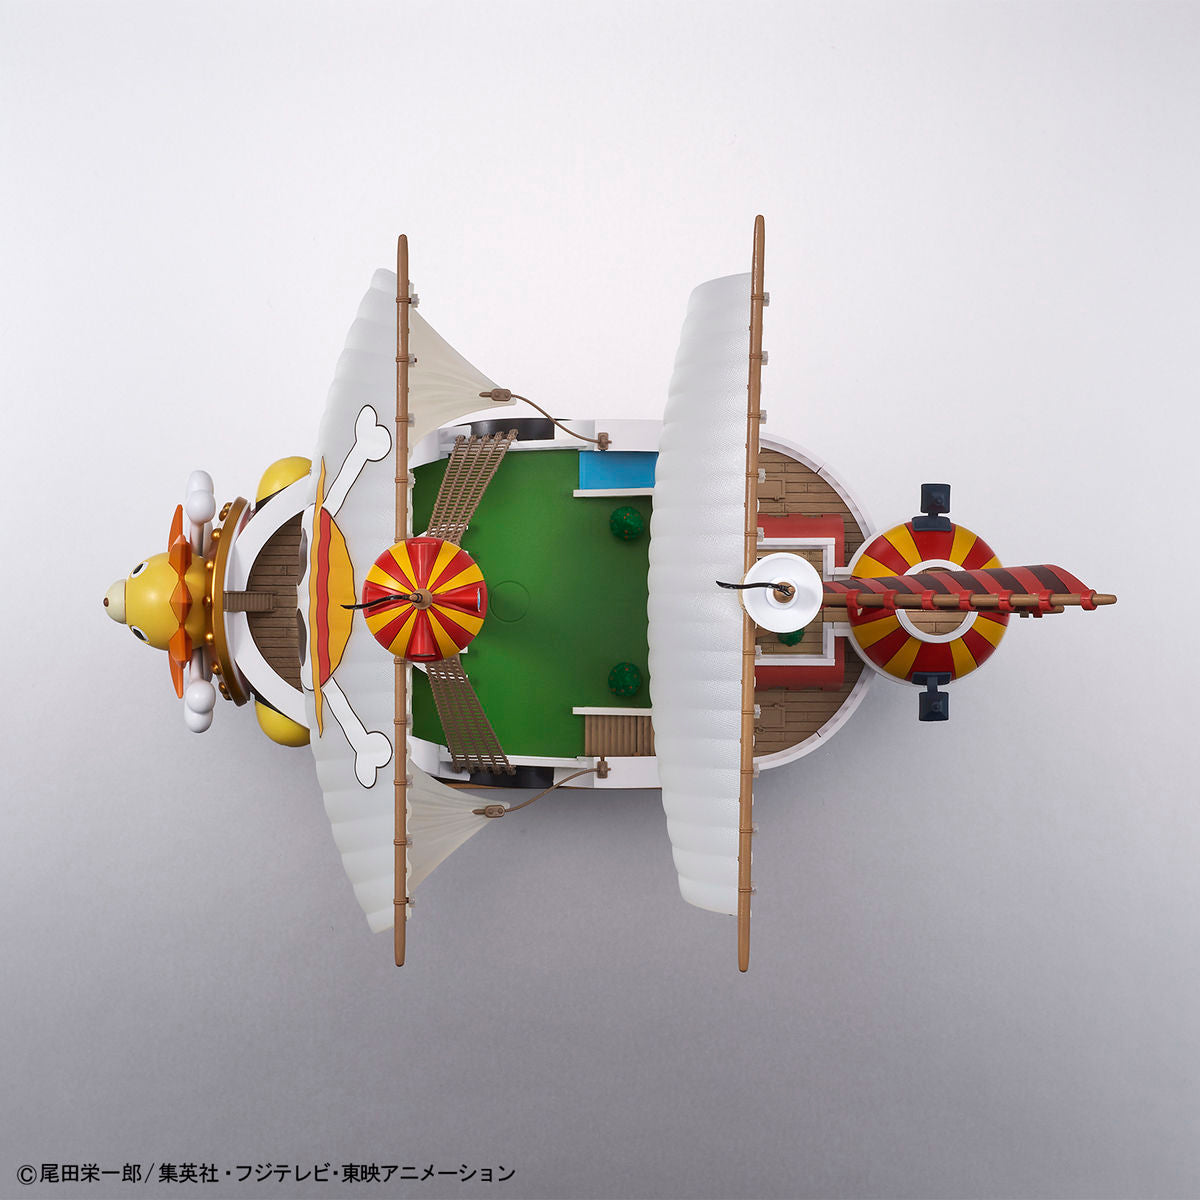 One Piece - Thousand Sunny (Wano Country Arc Ver.) - Model Kit, Straw Hat Pirates in Wano Country Arc outfits, Gaon Cannon and paddle included, Kaido's seal and water transfer decals, Shark Submerge III, Mini Merry II, Kurosai FR-U IV, dedicated display base, Bandai - Nippon Figures